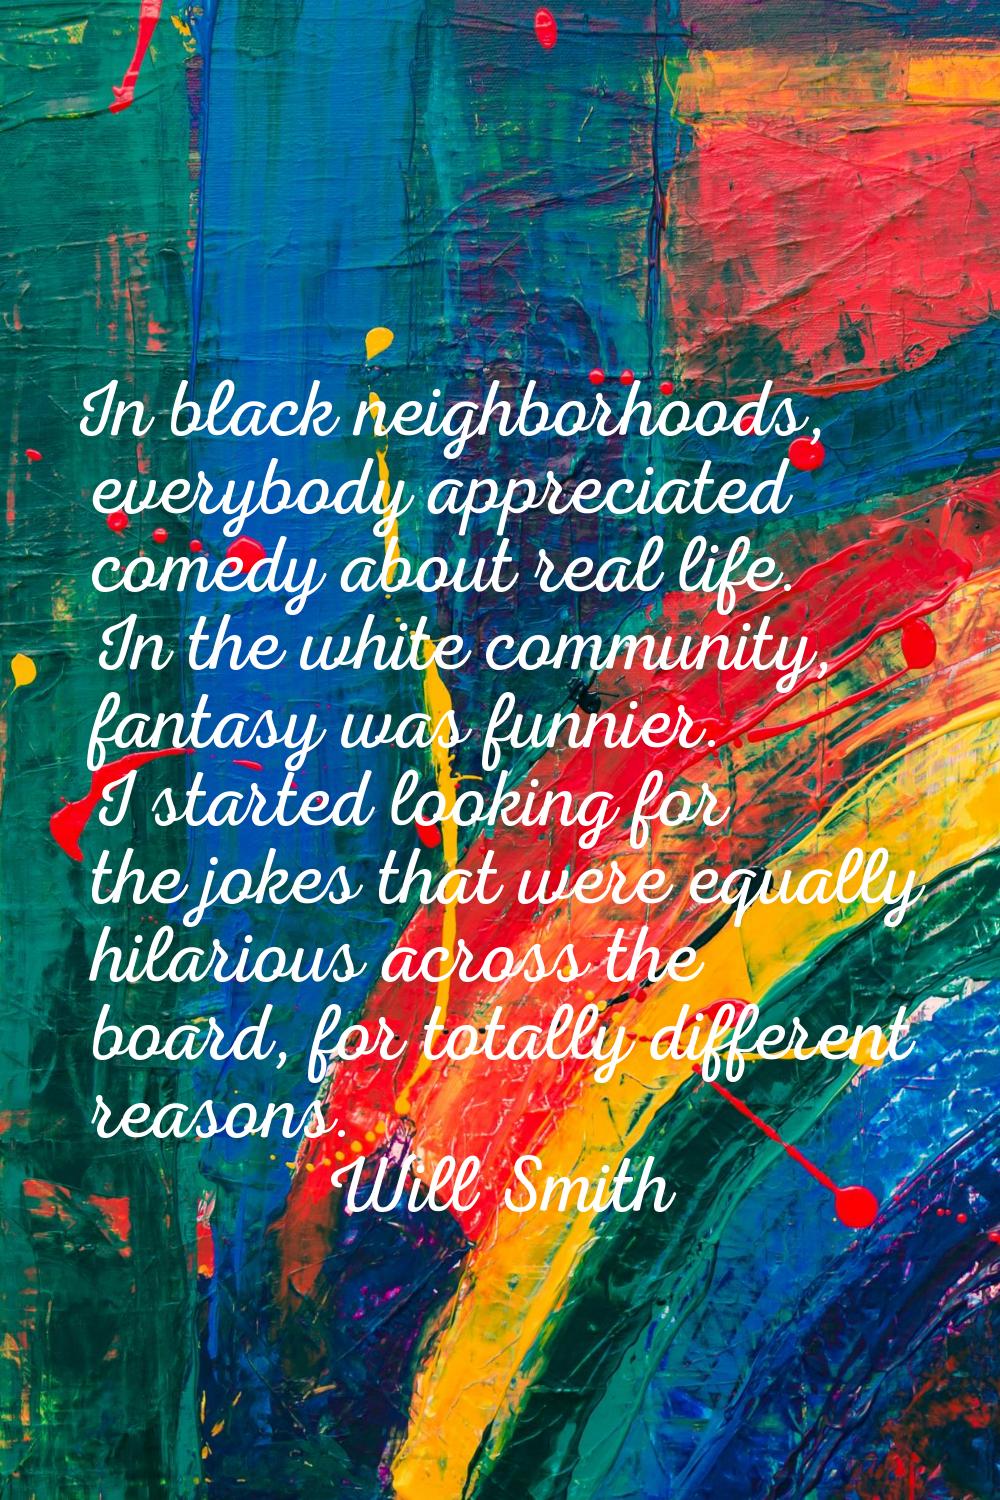 In black neighborhoods, everybody appreciated comedy about real life. In the white community, fanta